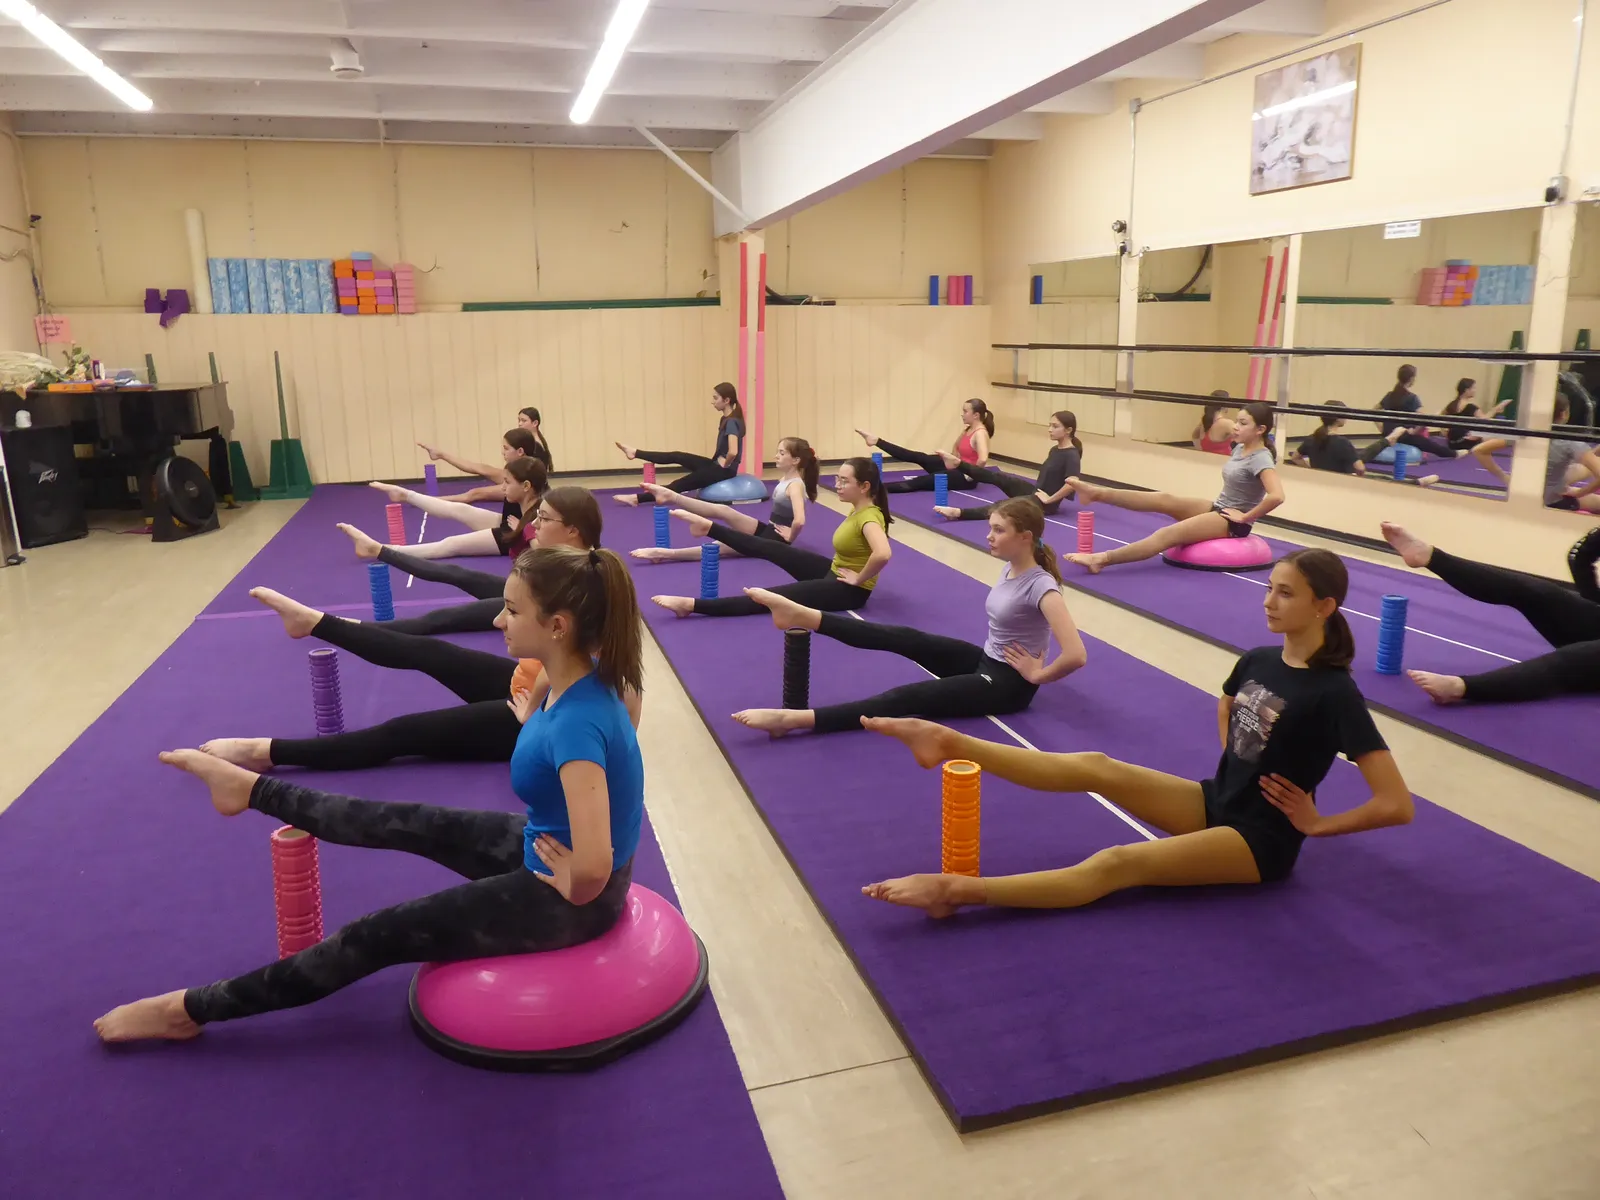 Students in a stretching dance class